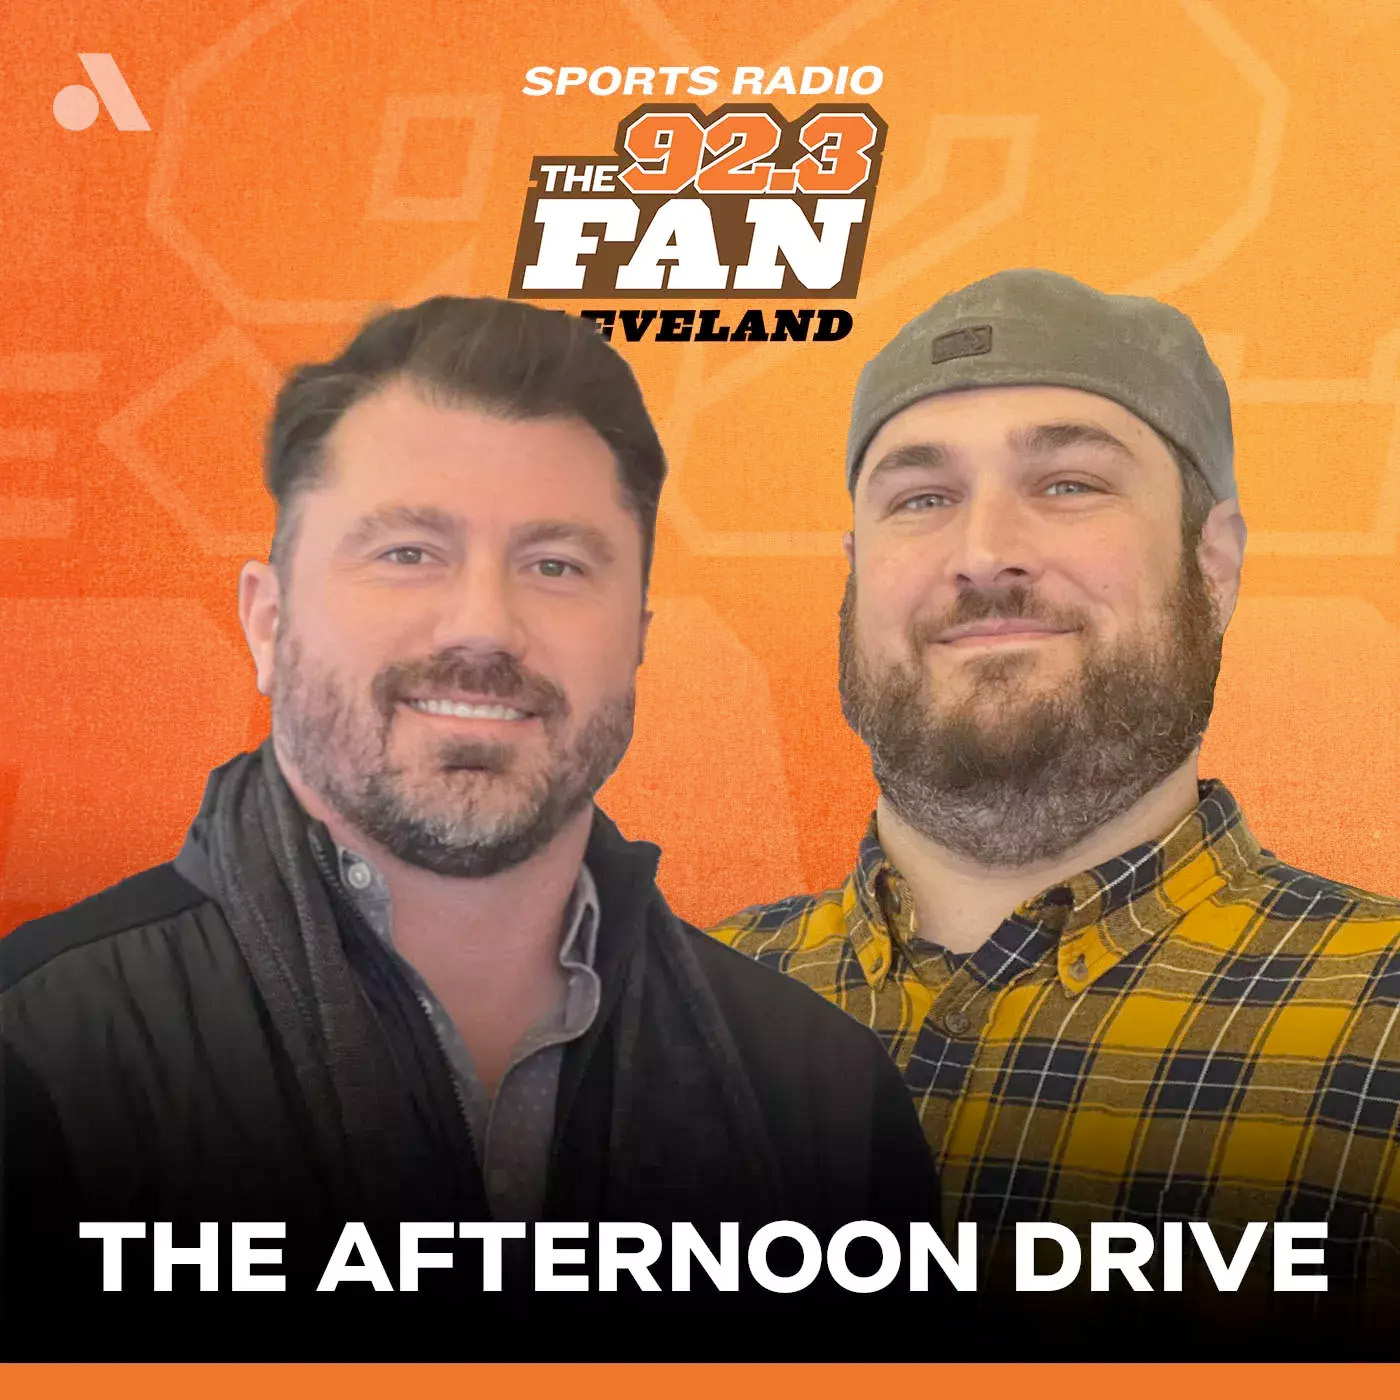 Nick got an interesting piece of fan mail + how Browns convince this is different